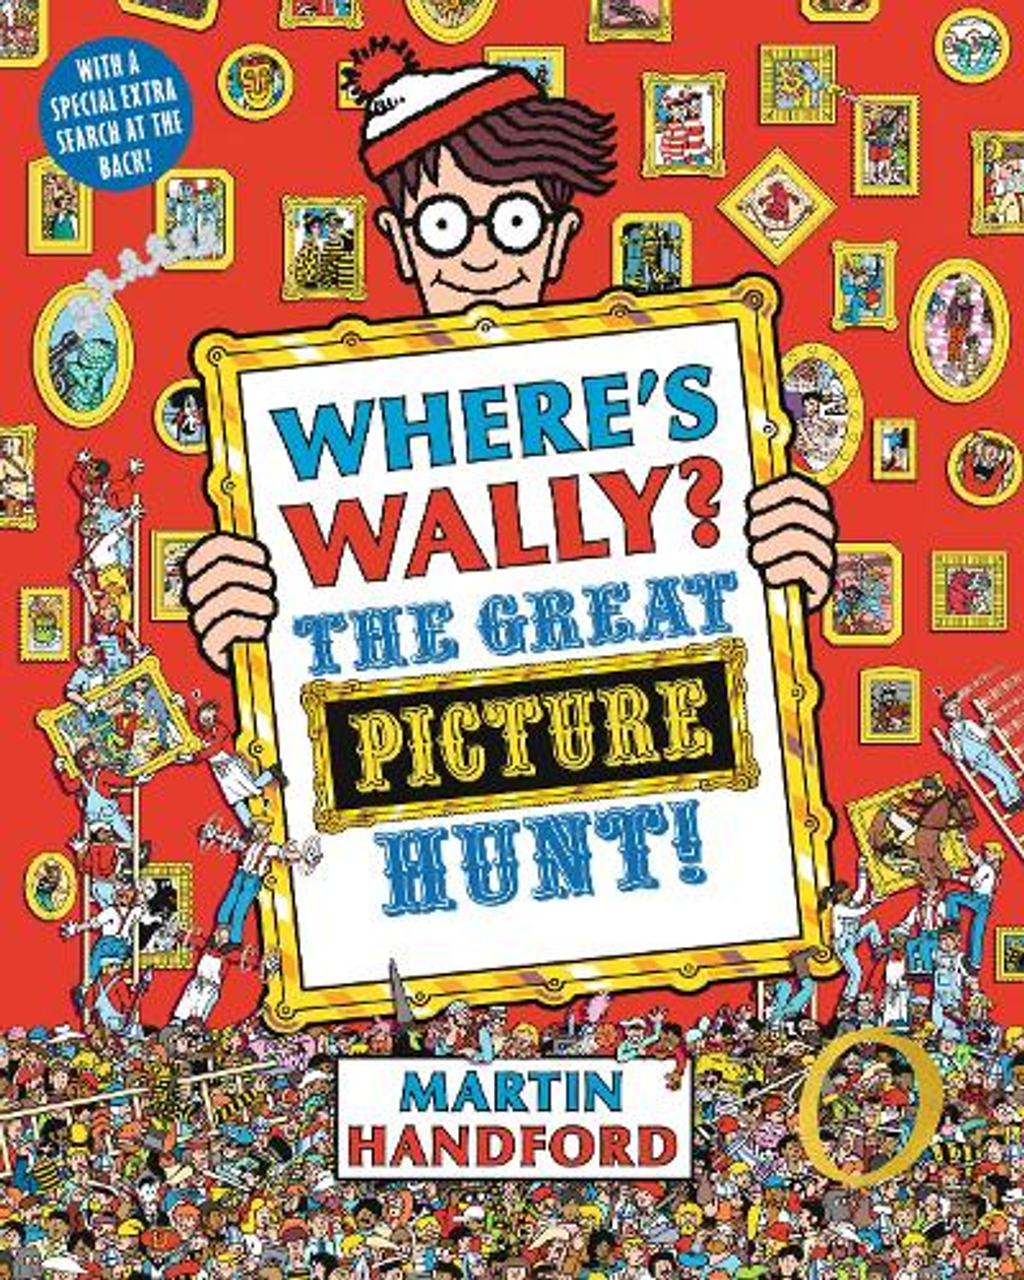 Where's Wally the great picture hunt 1